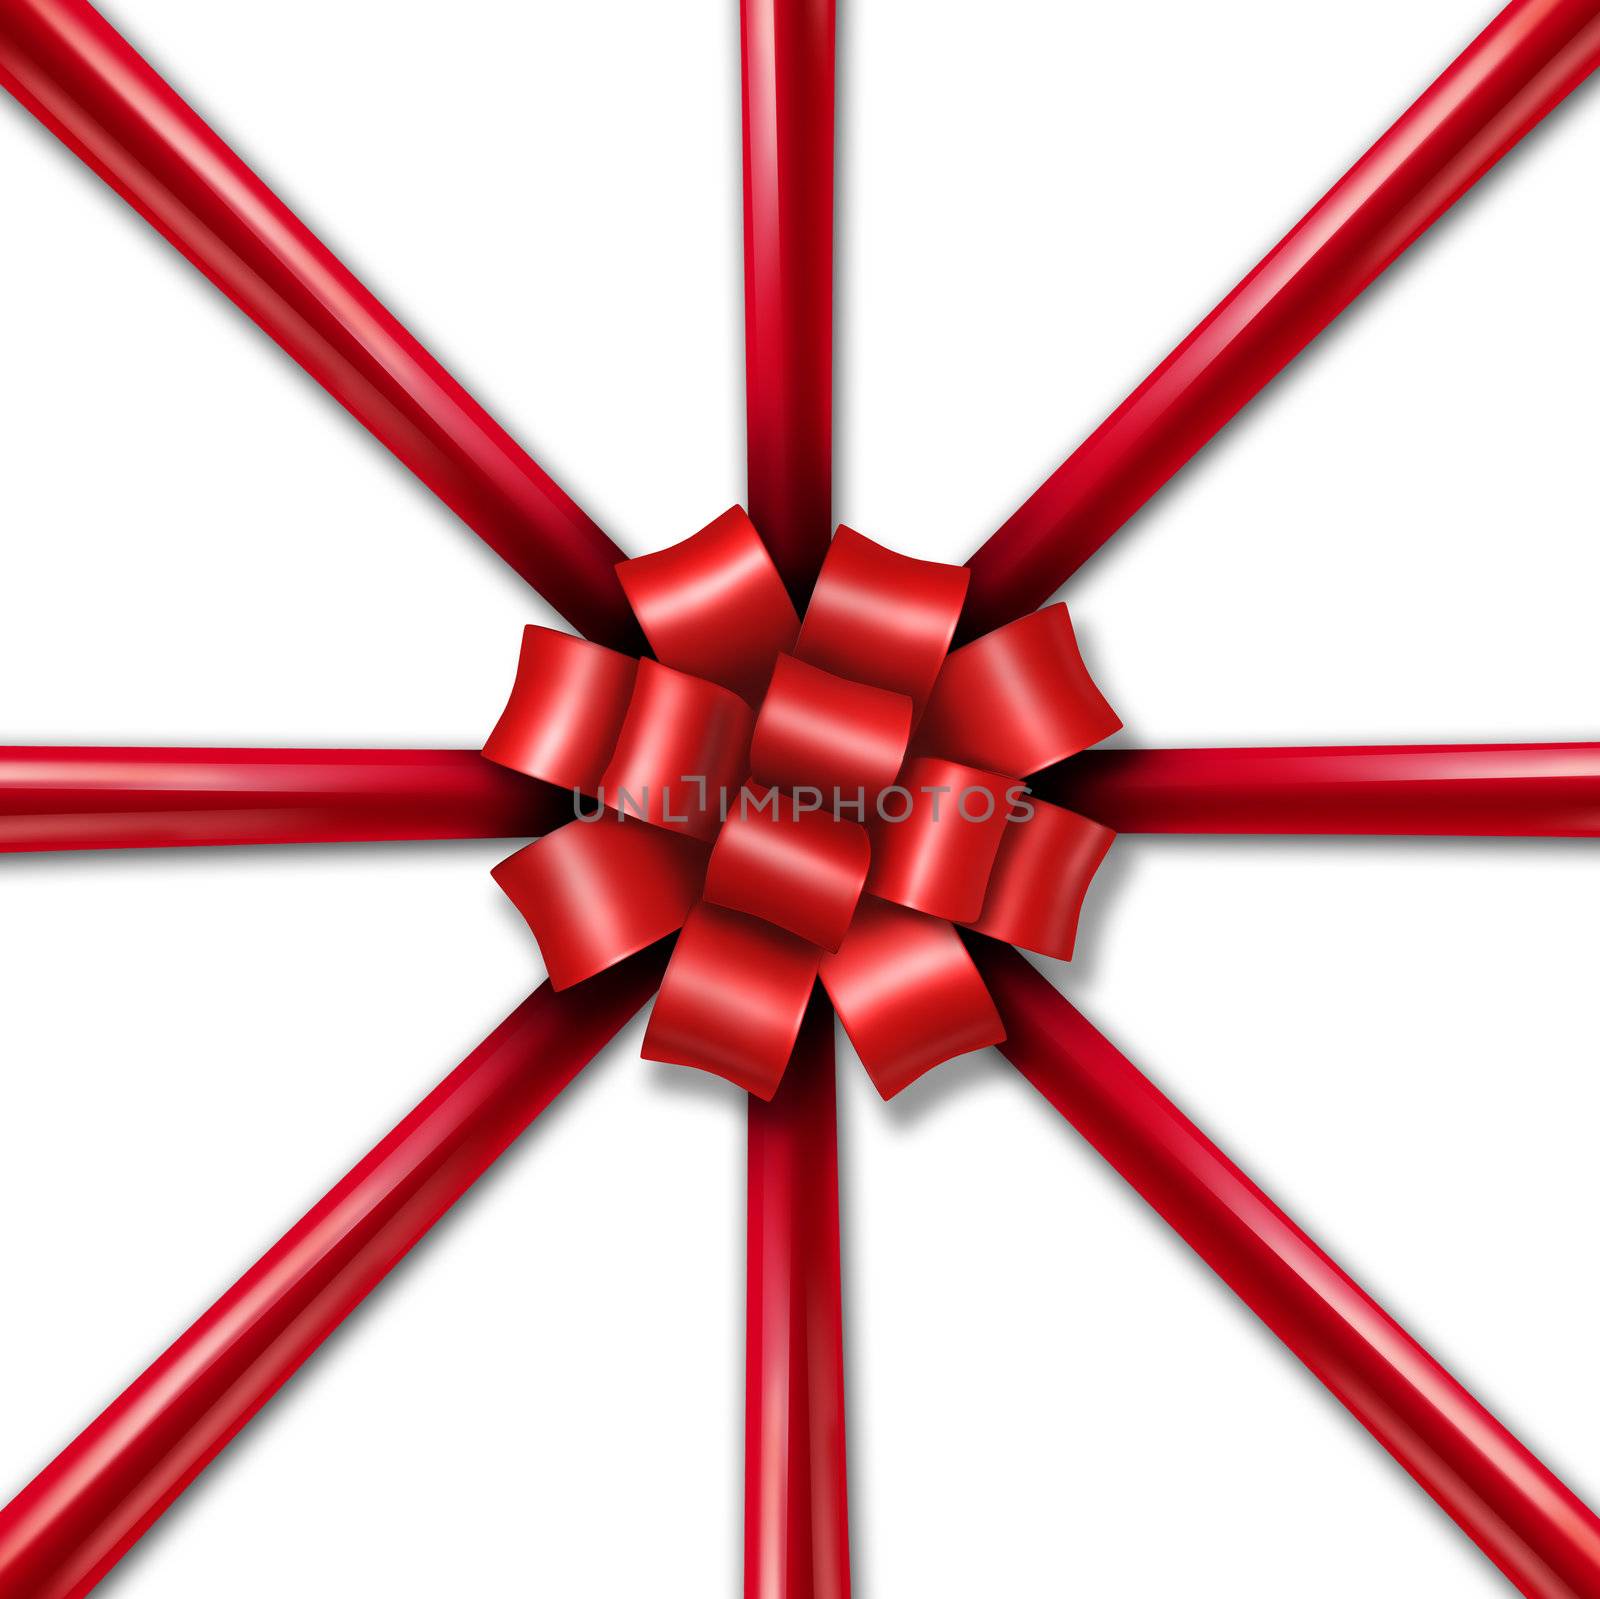 Star burst Christmas holiday red ribbon as a symbol of  a winter season tradition of gift giving and charitable spirit of the seasonal celebration on a white background.